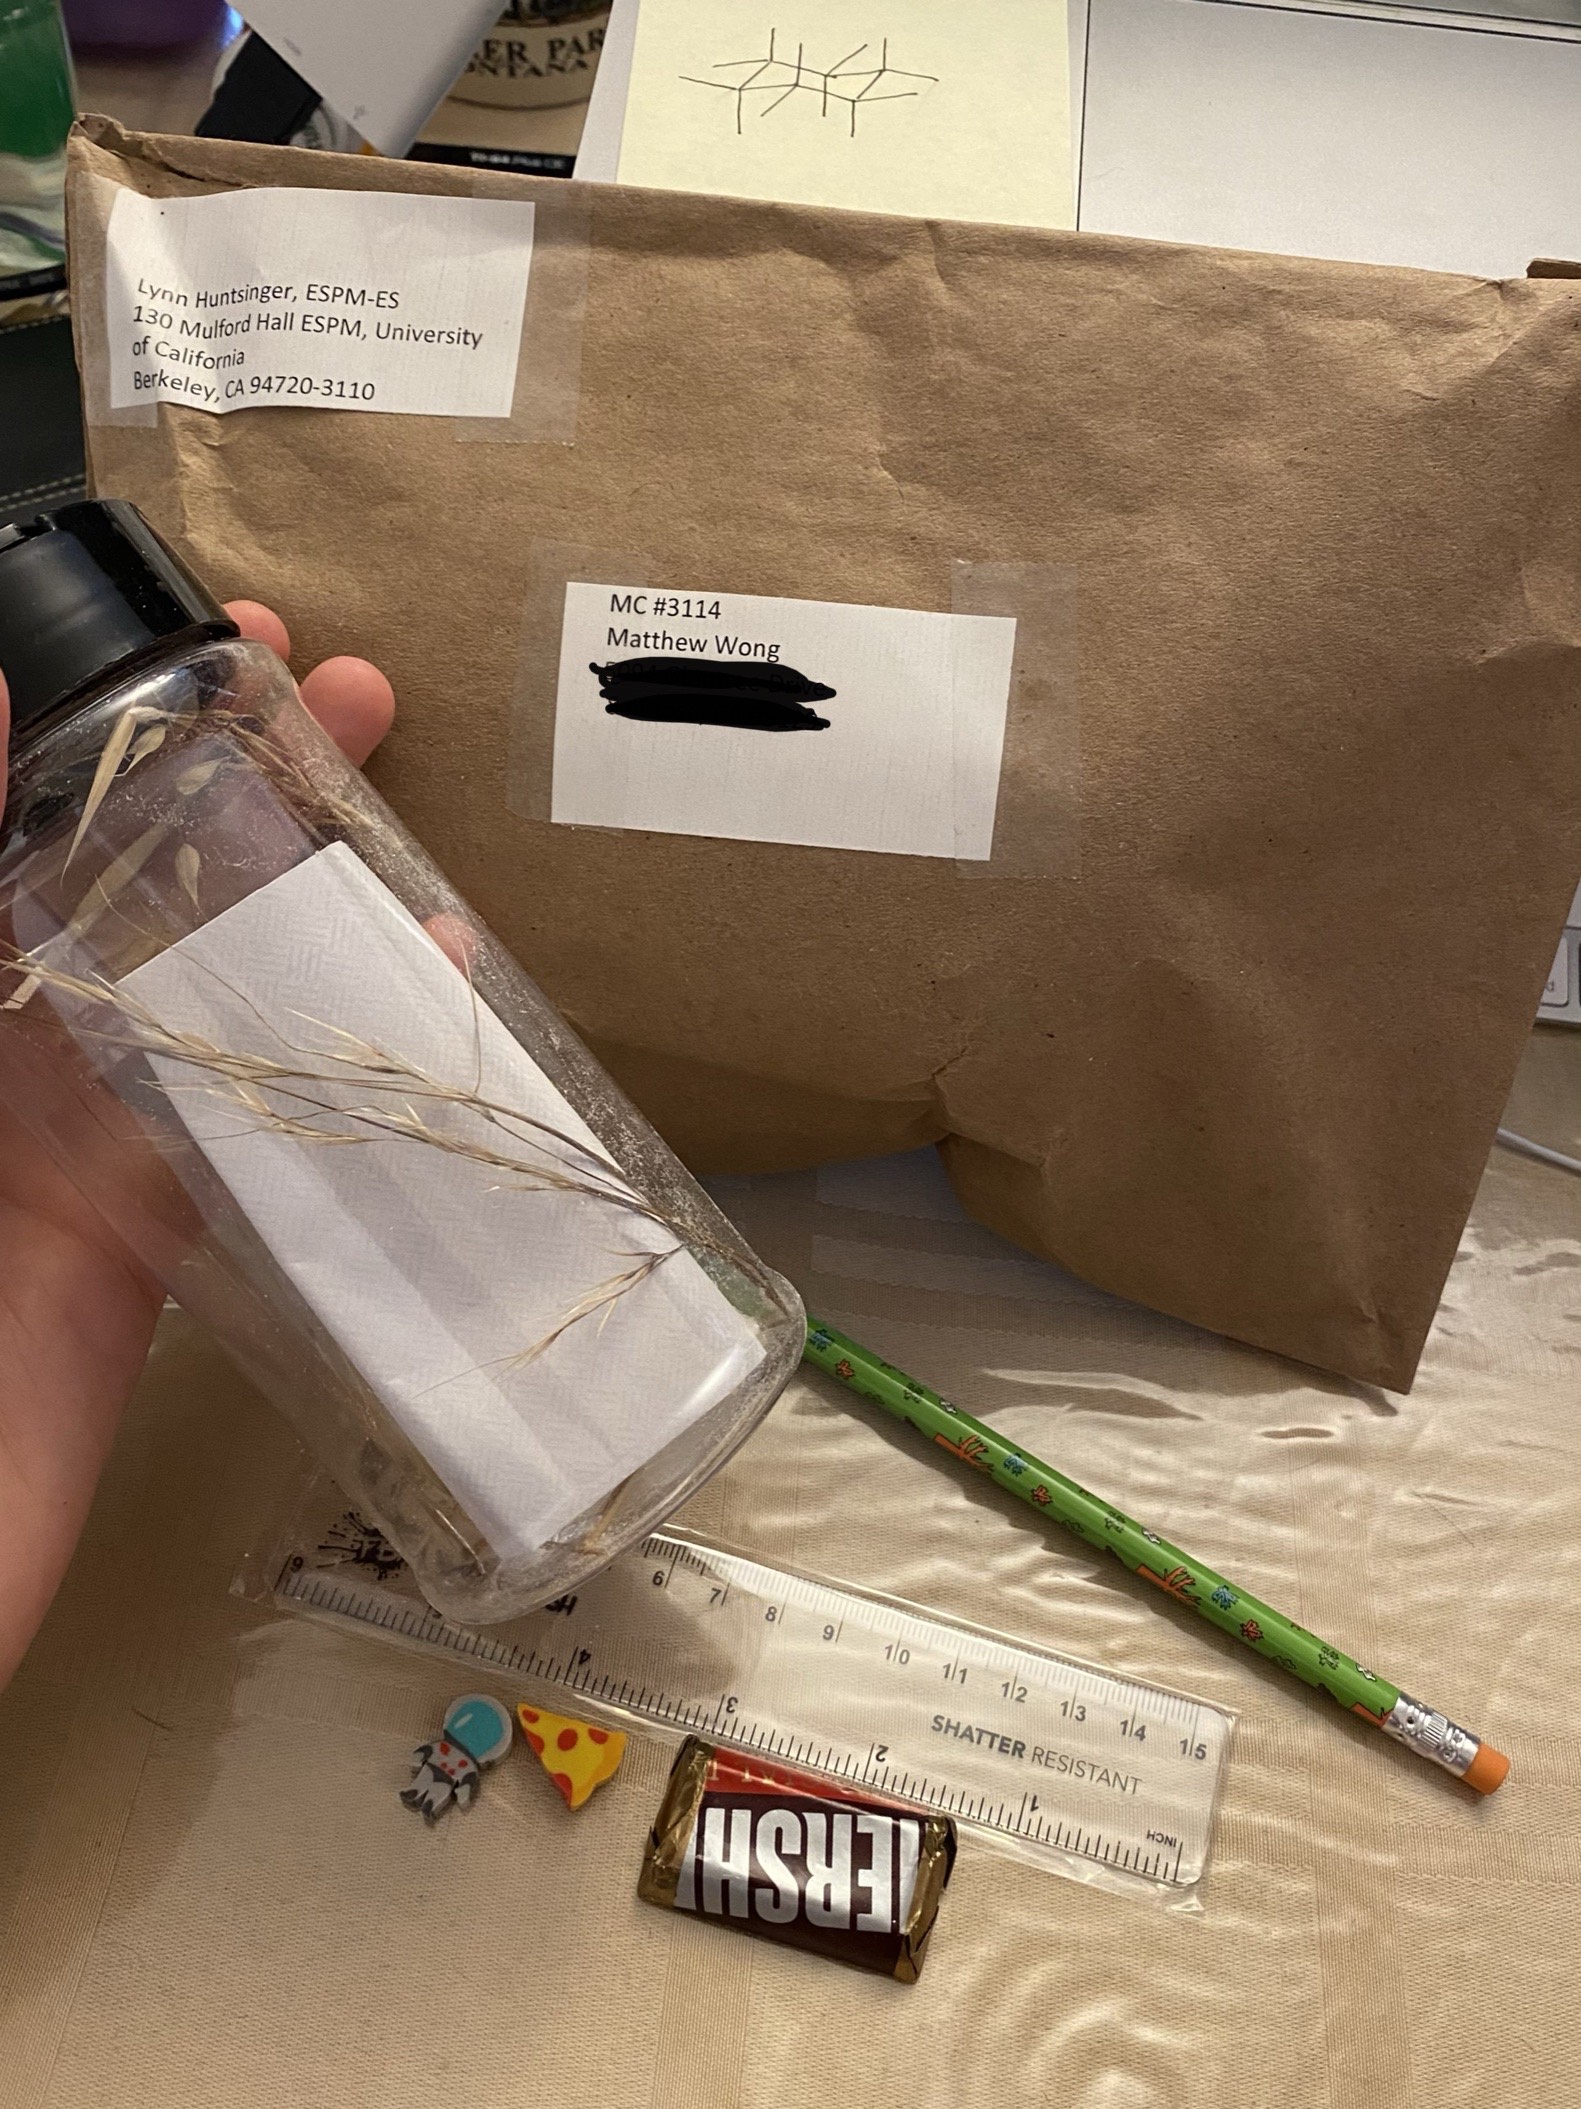 Photo of opened experiment kit sent out by a professor to students